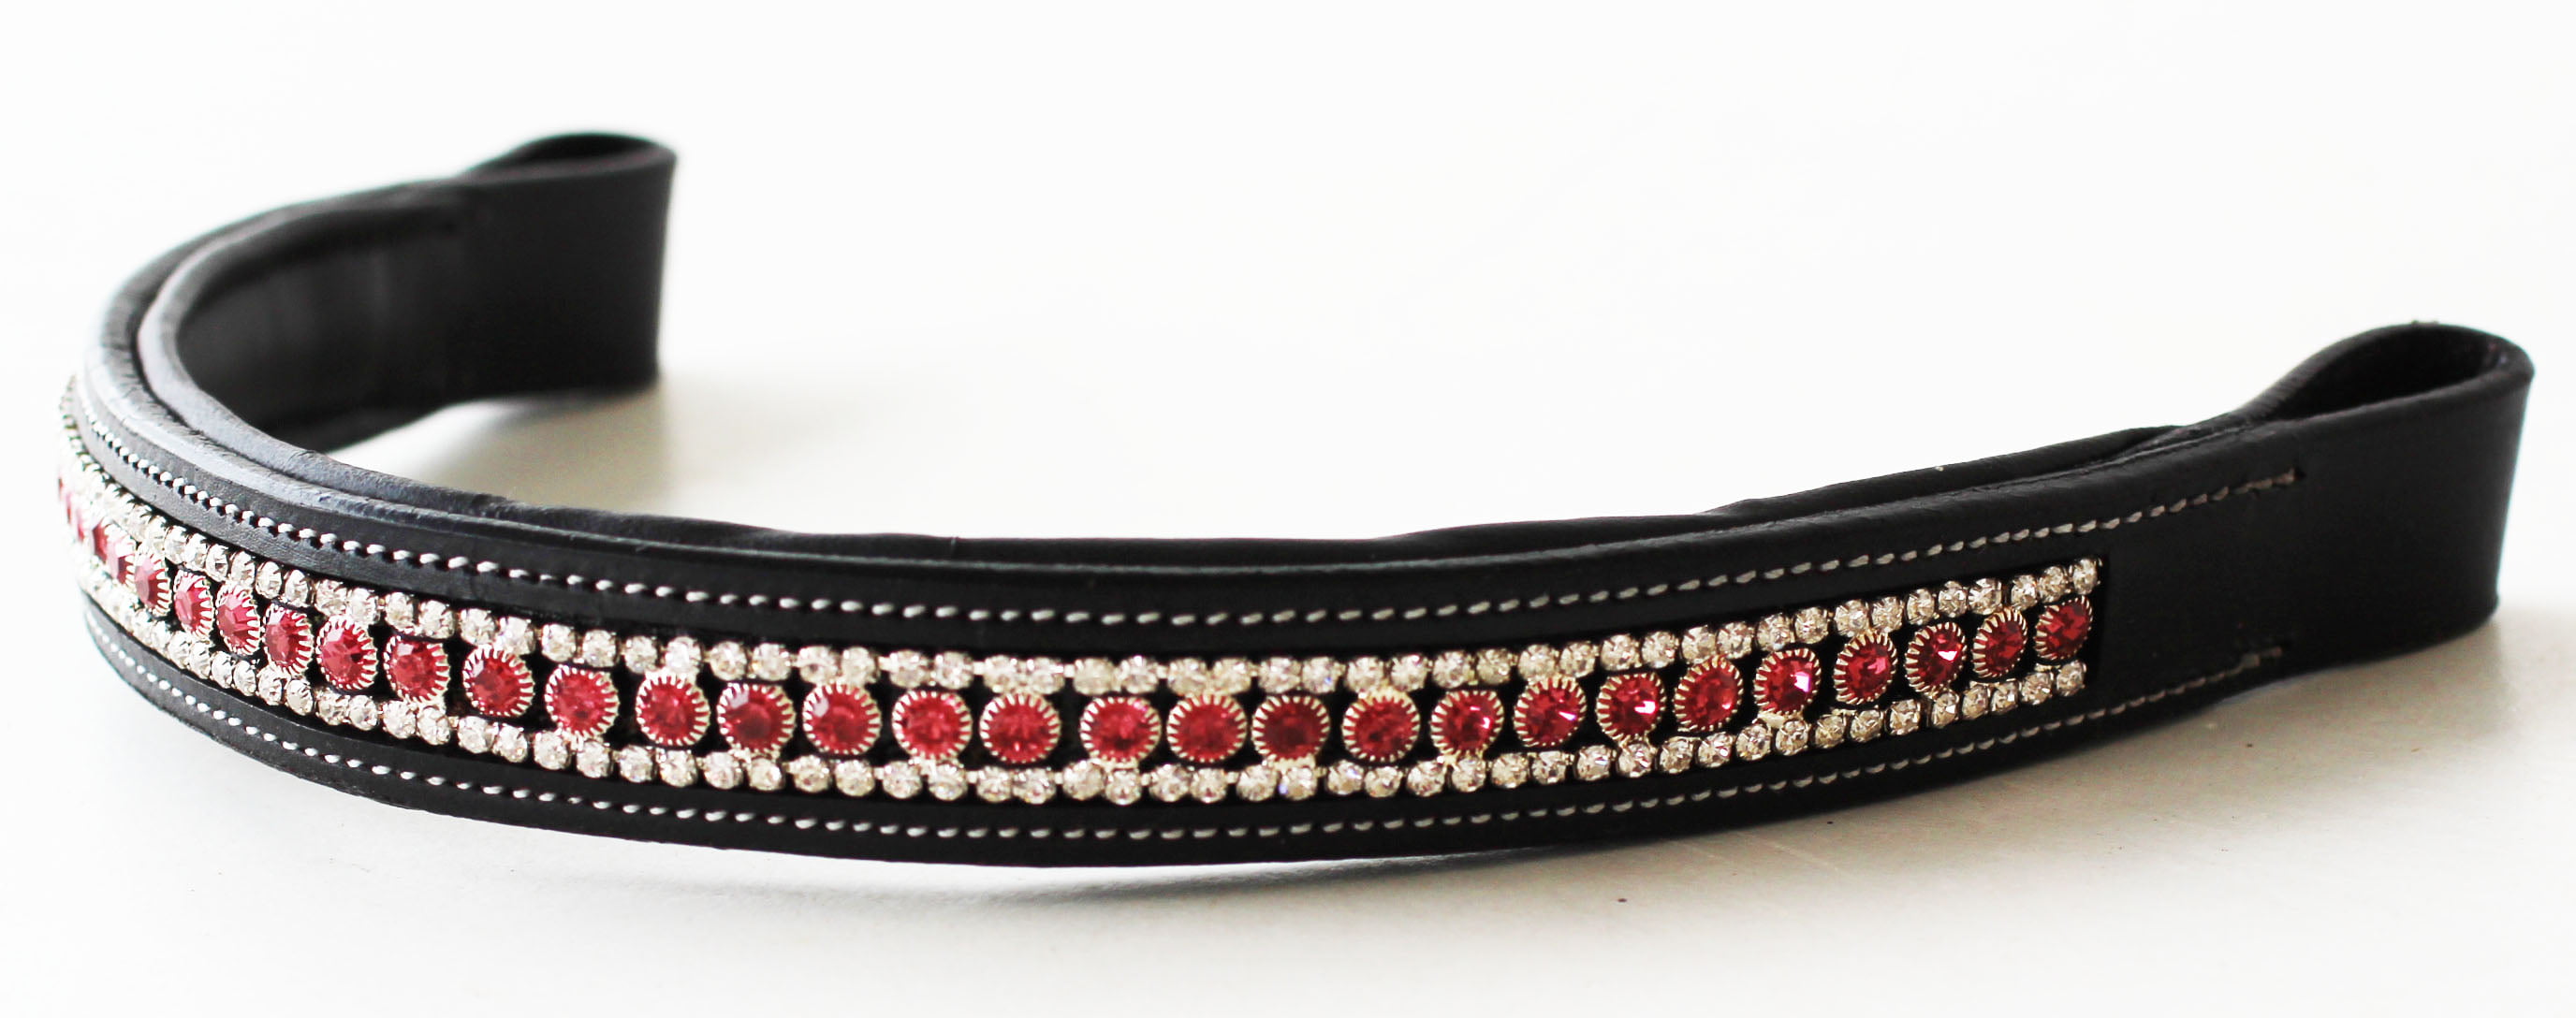 Fancy Crystal Trim Dip Browband Padded Black /Brown Leather Bedazzled! 